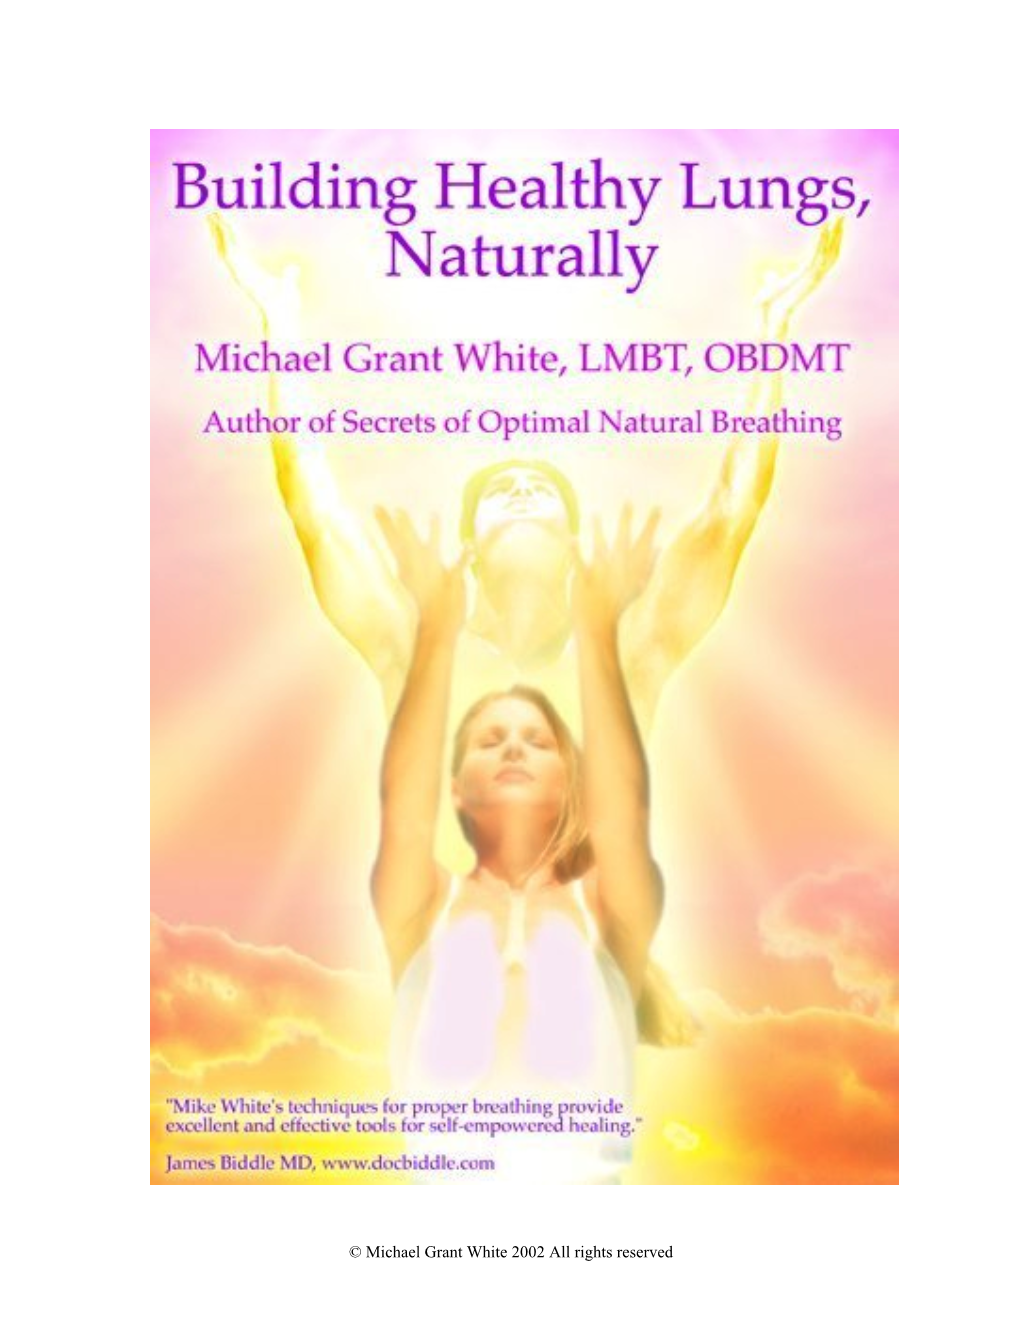 Building Healthy Lungs, Naturally